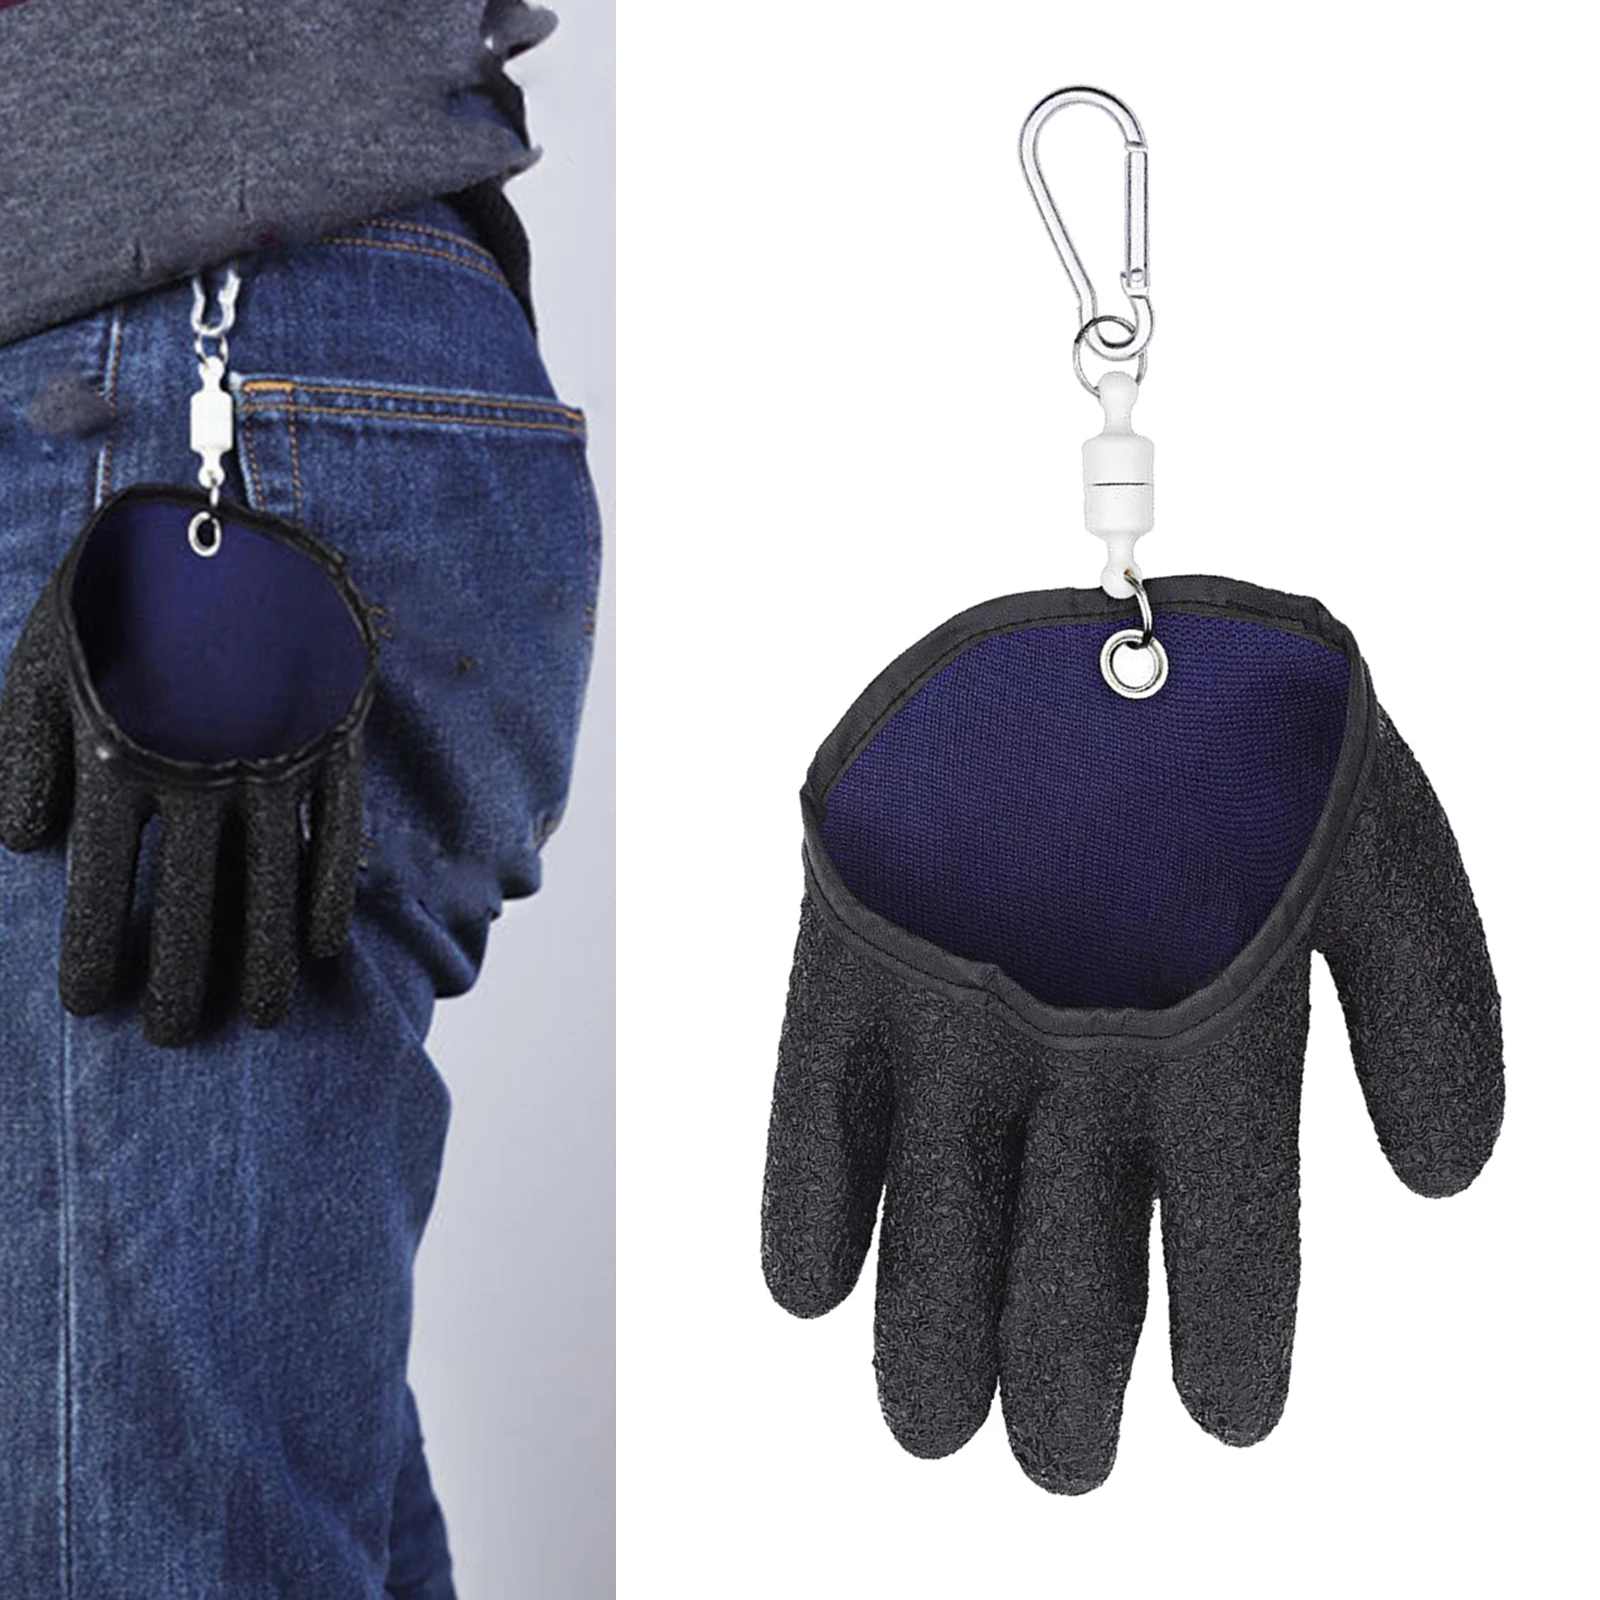 Fisherman Professional Left/ Right Hand Fishing Glove, with Magnet Hooks Release for Winter